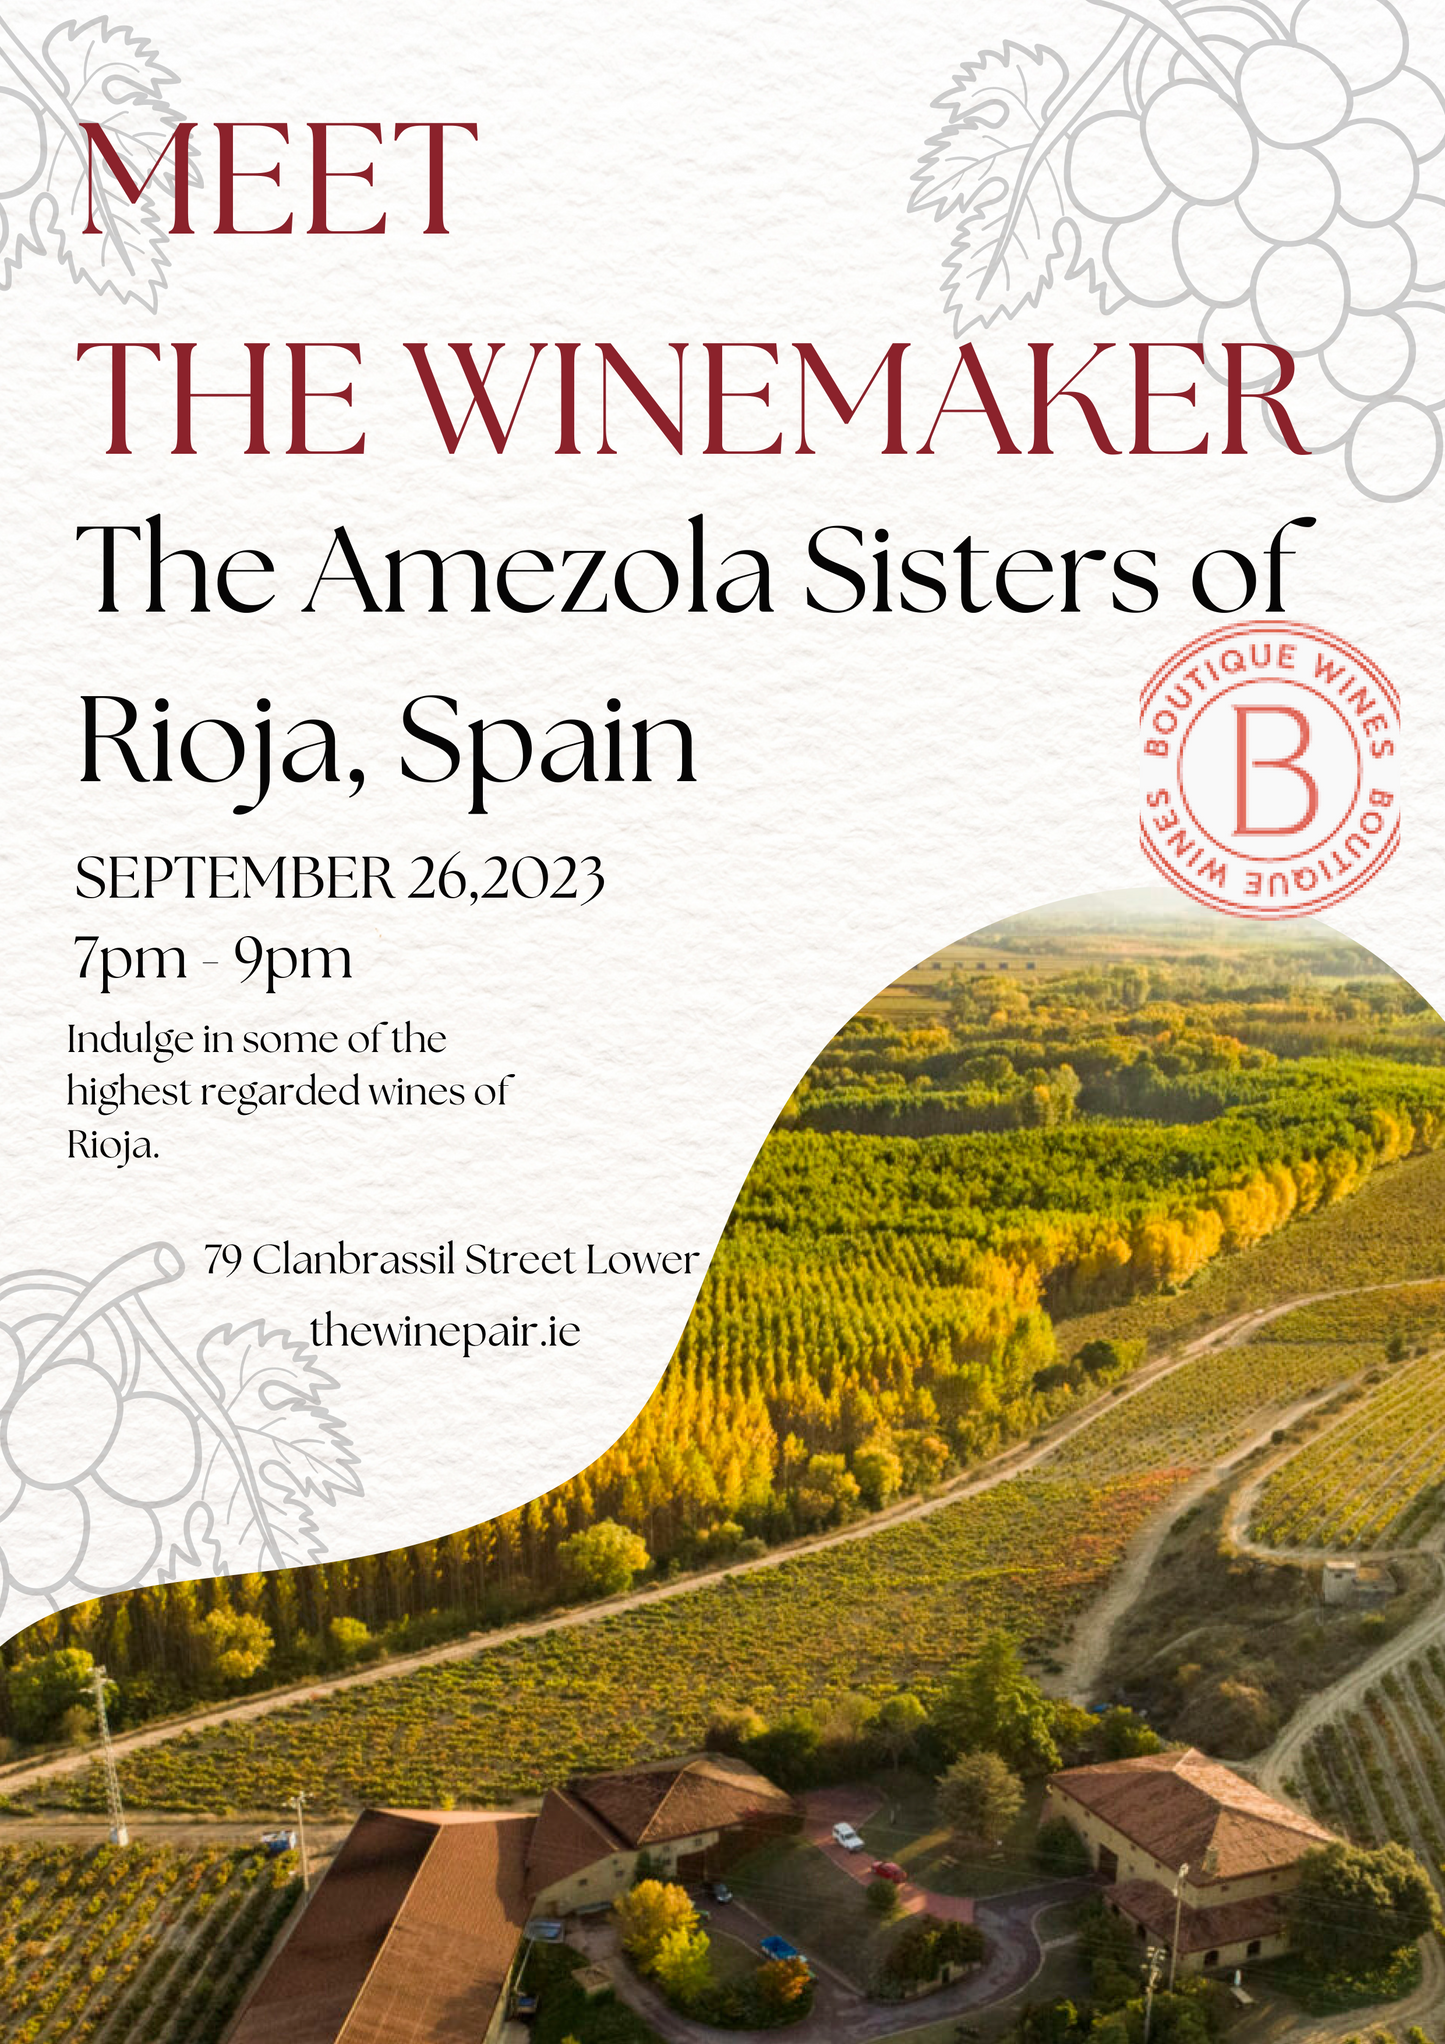 Wine Event - Meet the Winemaker - The Amezola Sisters - September 26th